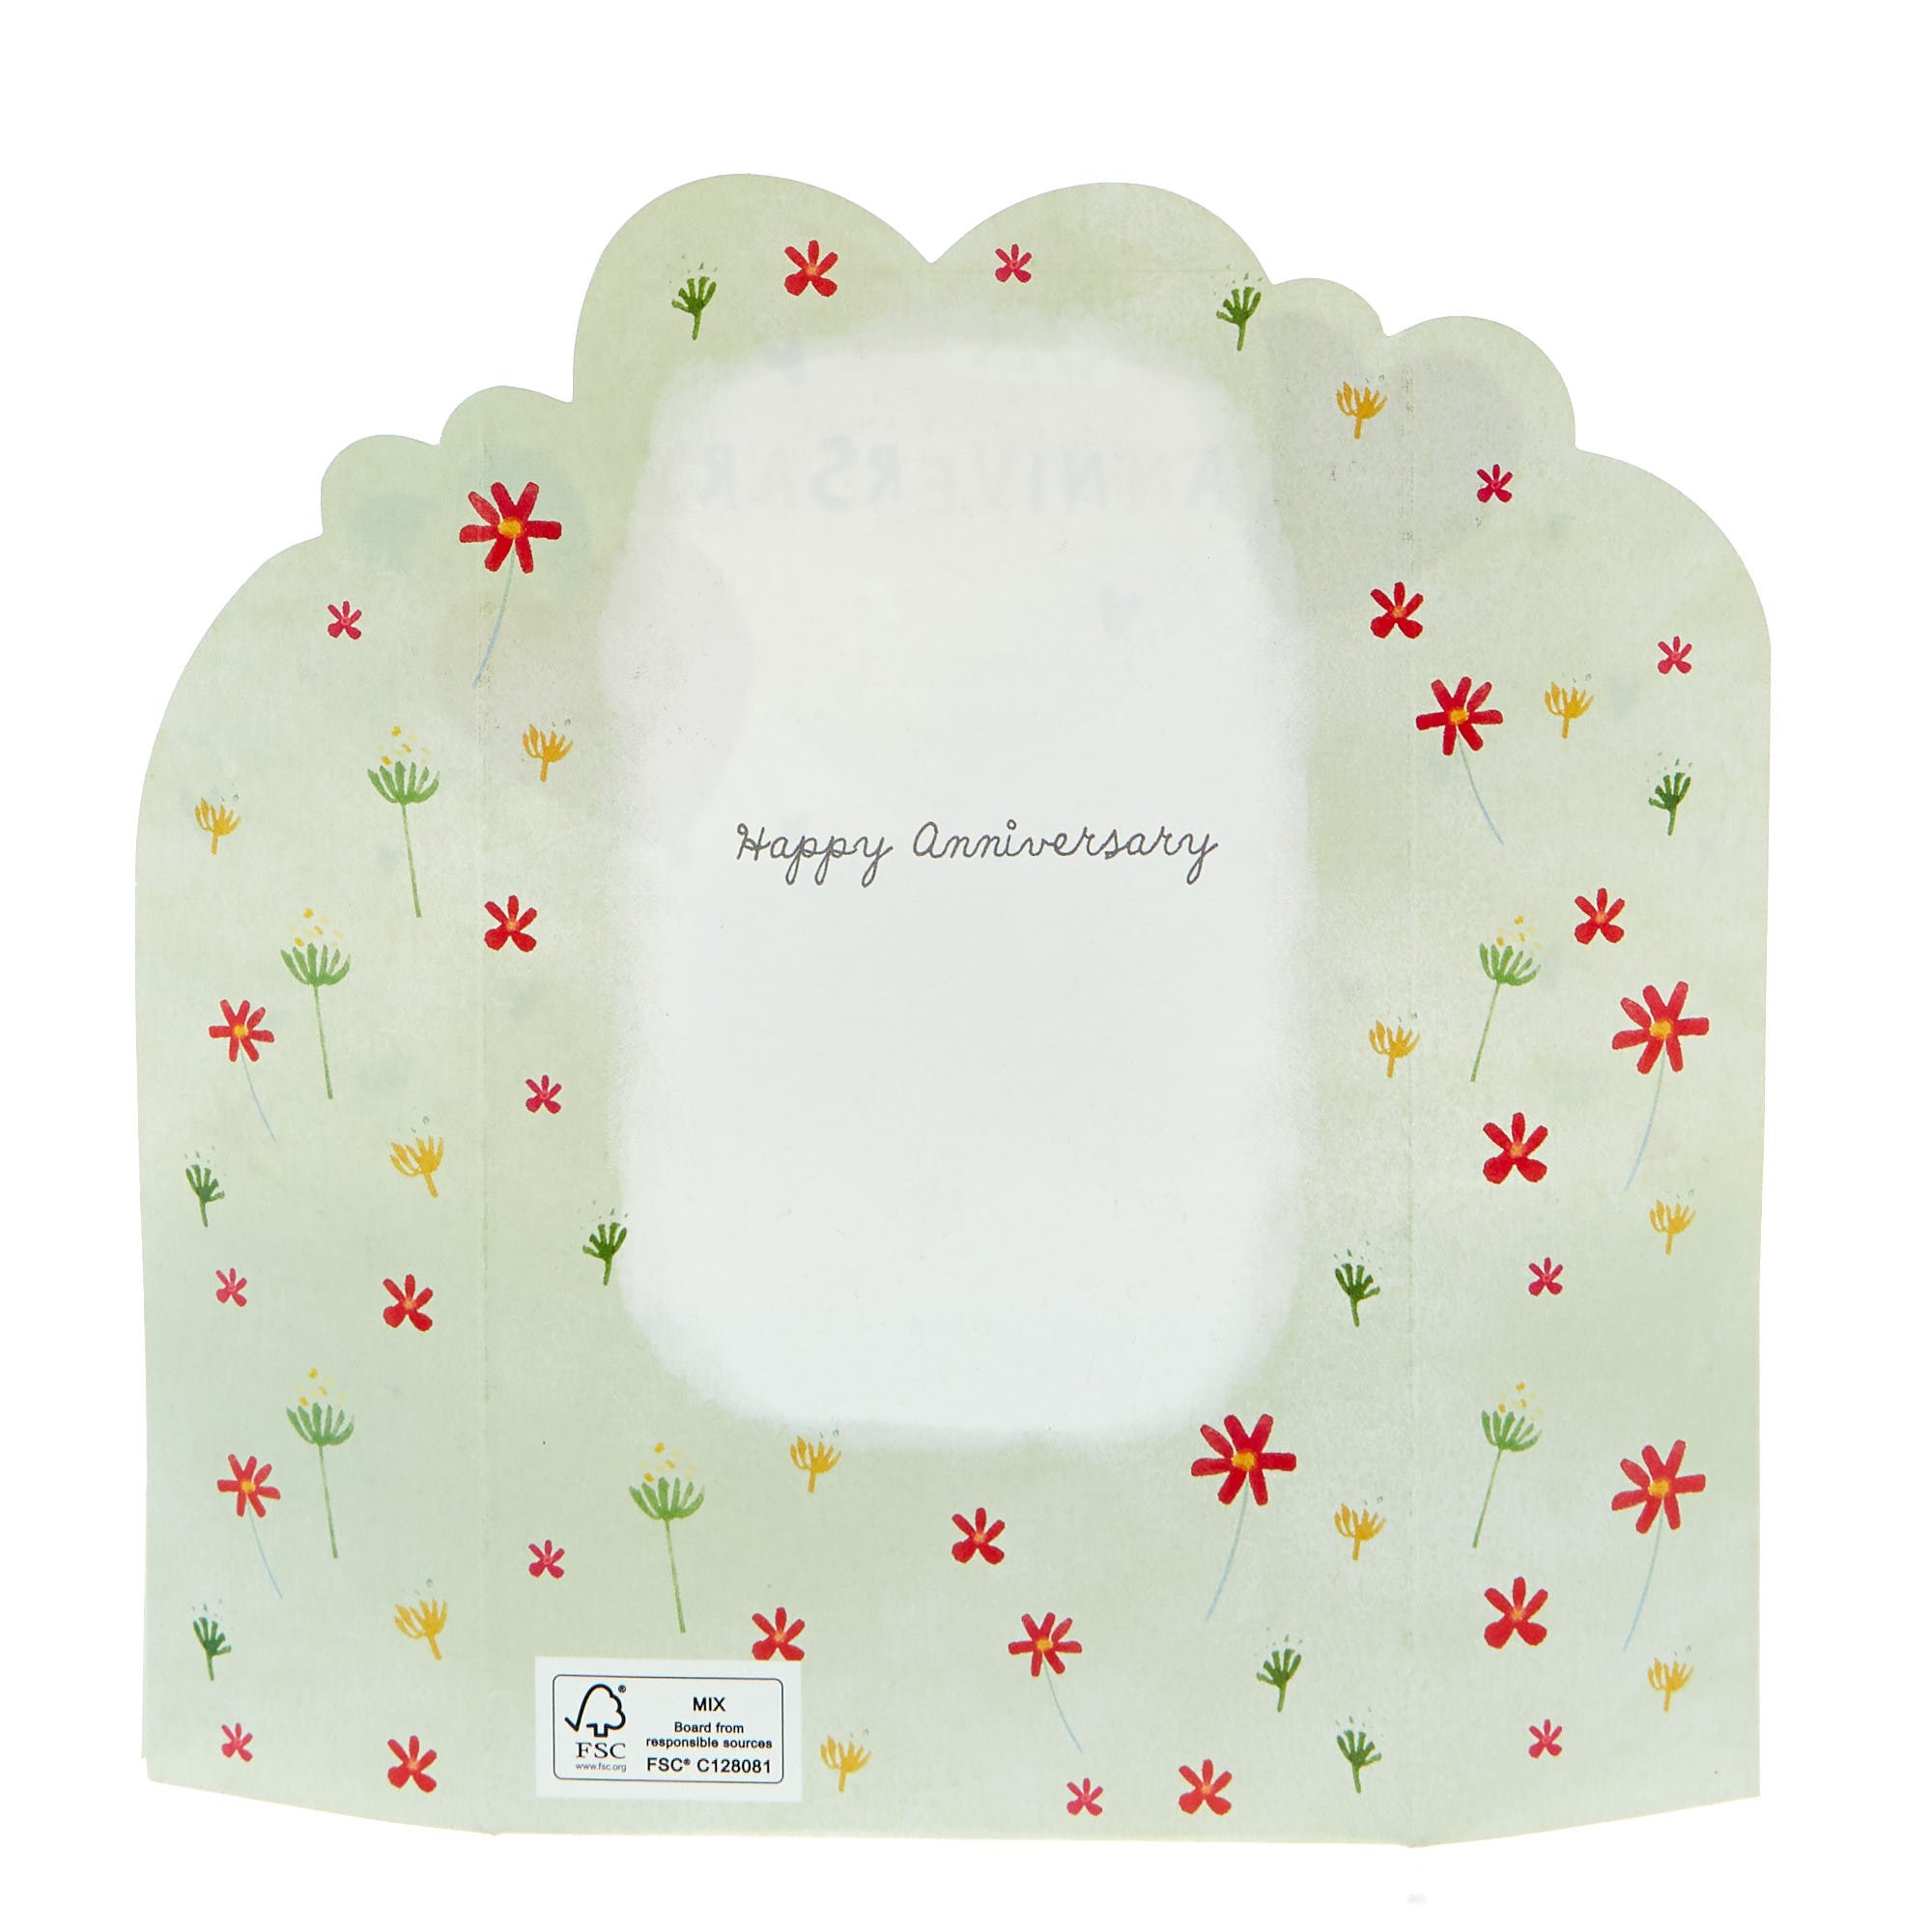 3D Pop-Up Anniversary Card - I Love You Today & Always